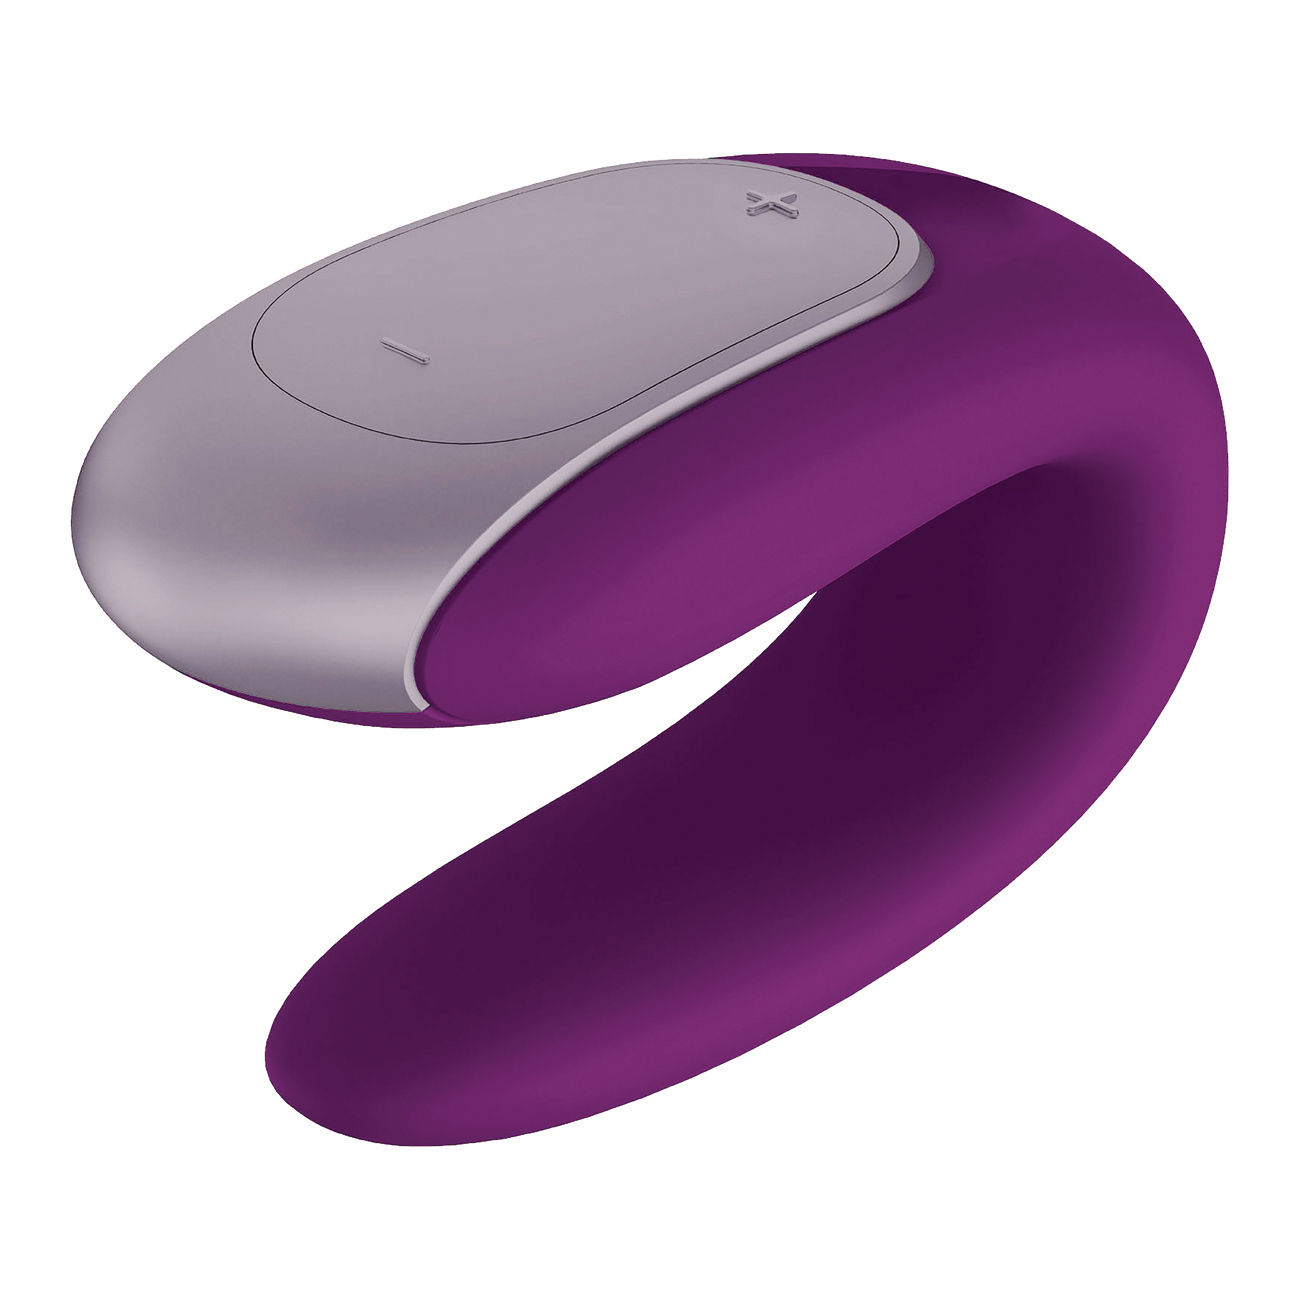 SATISFYER Double Fun violet with Remote Control